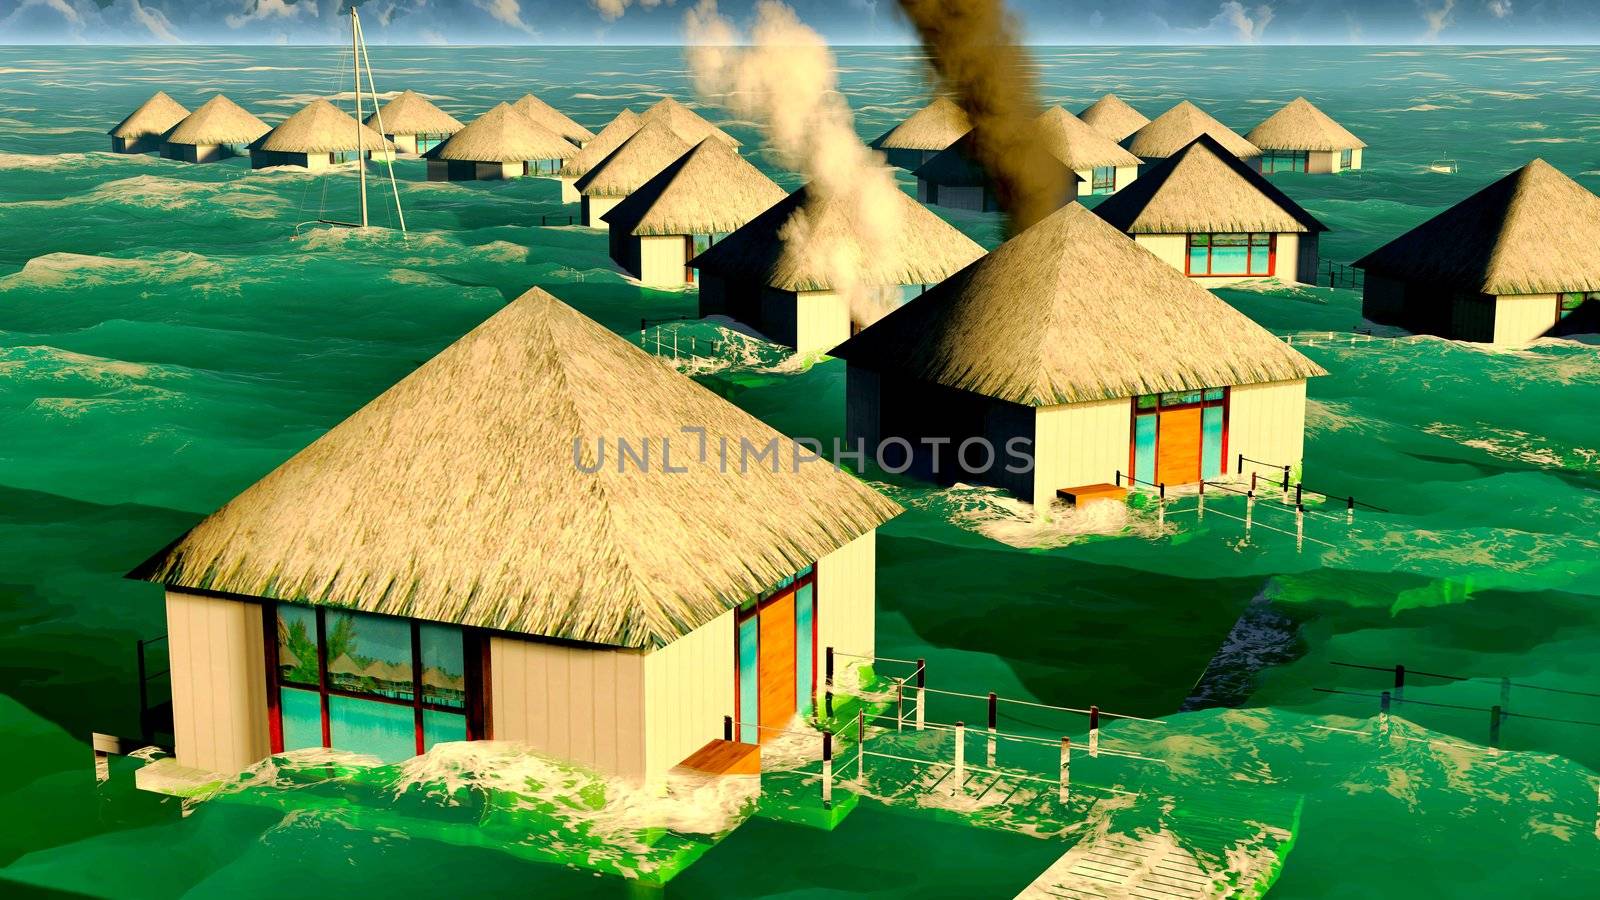 Tsunami destroying bungalows by andromeda13